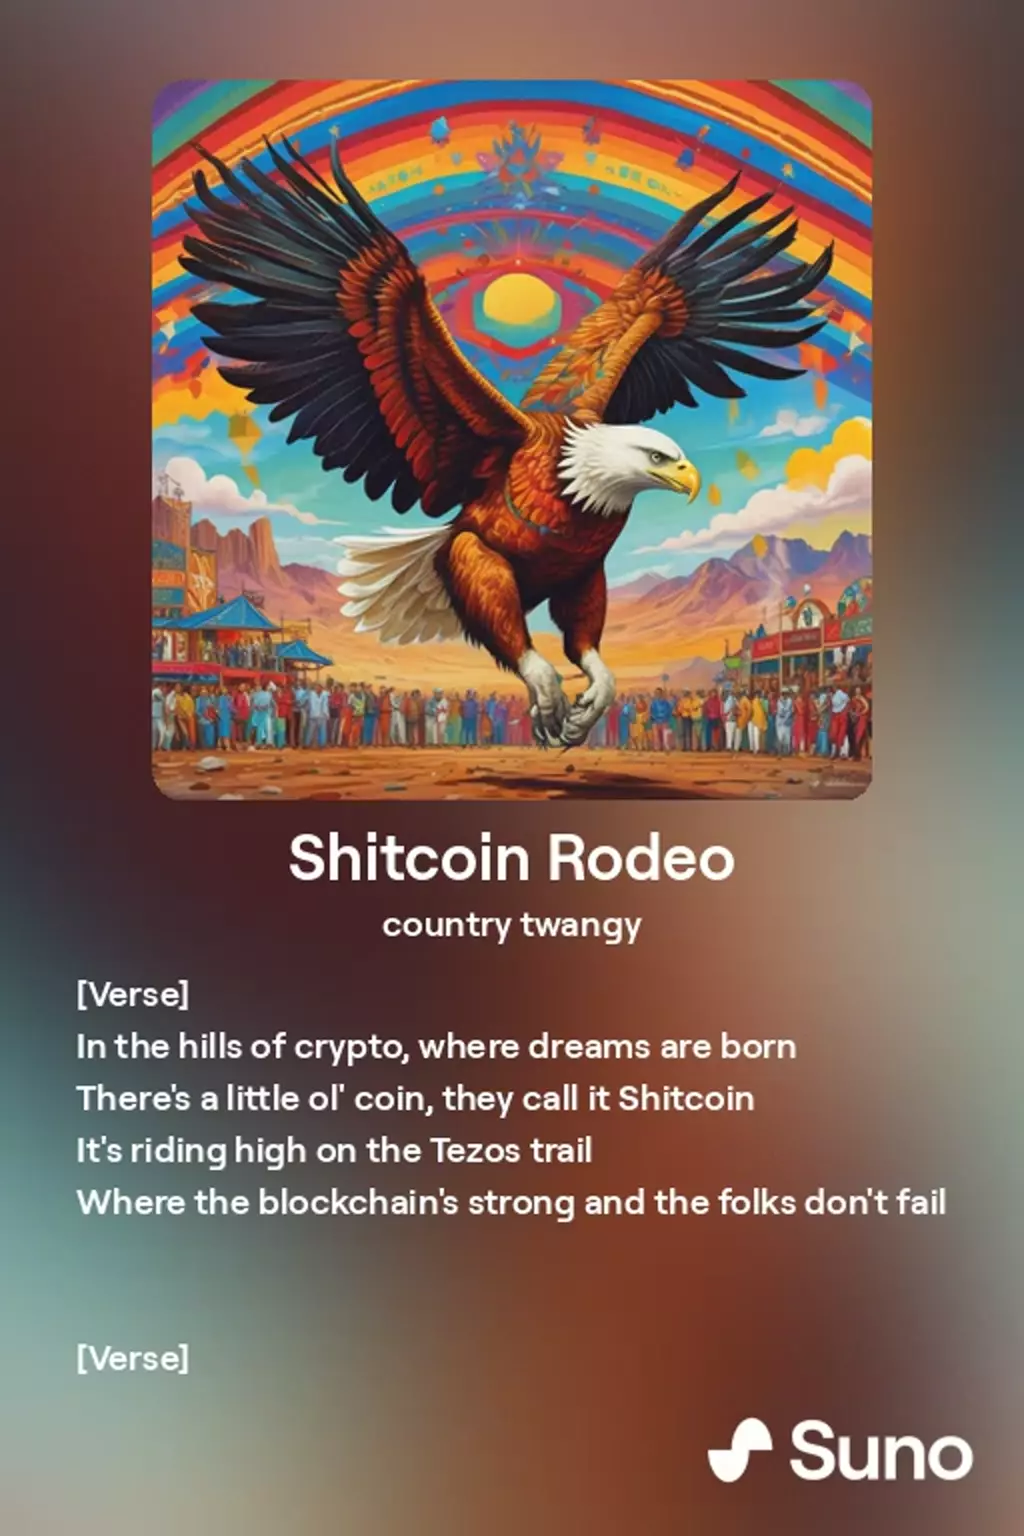 $HITcoin Rodeo